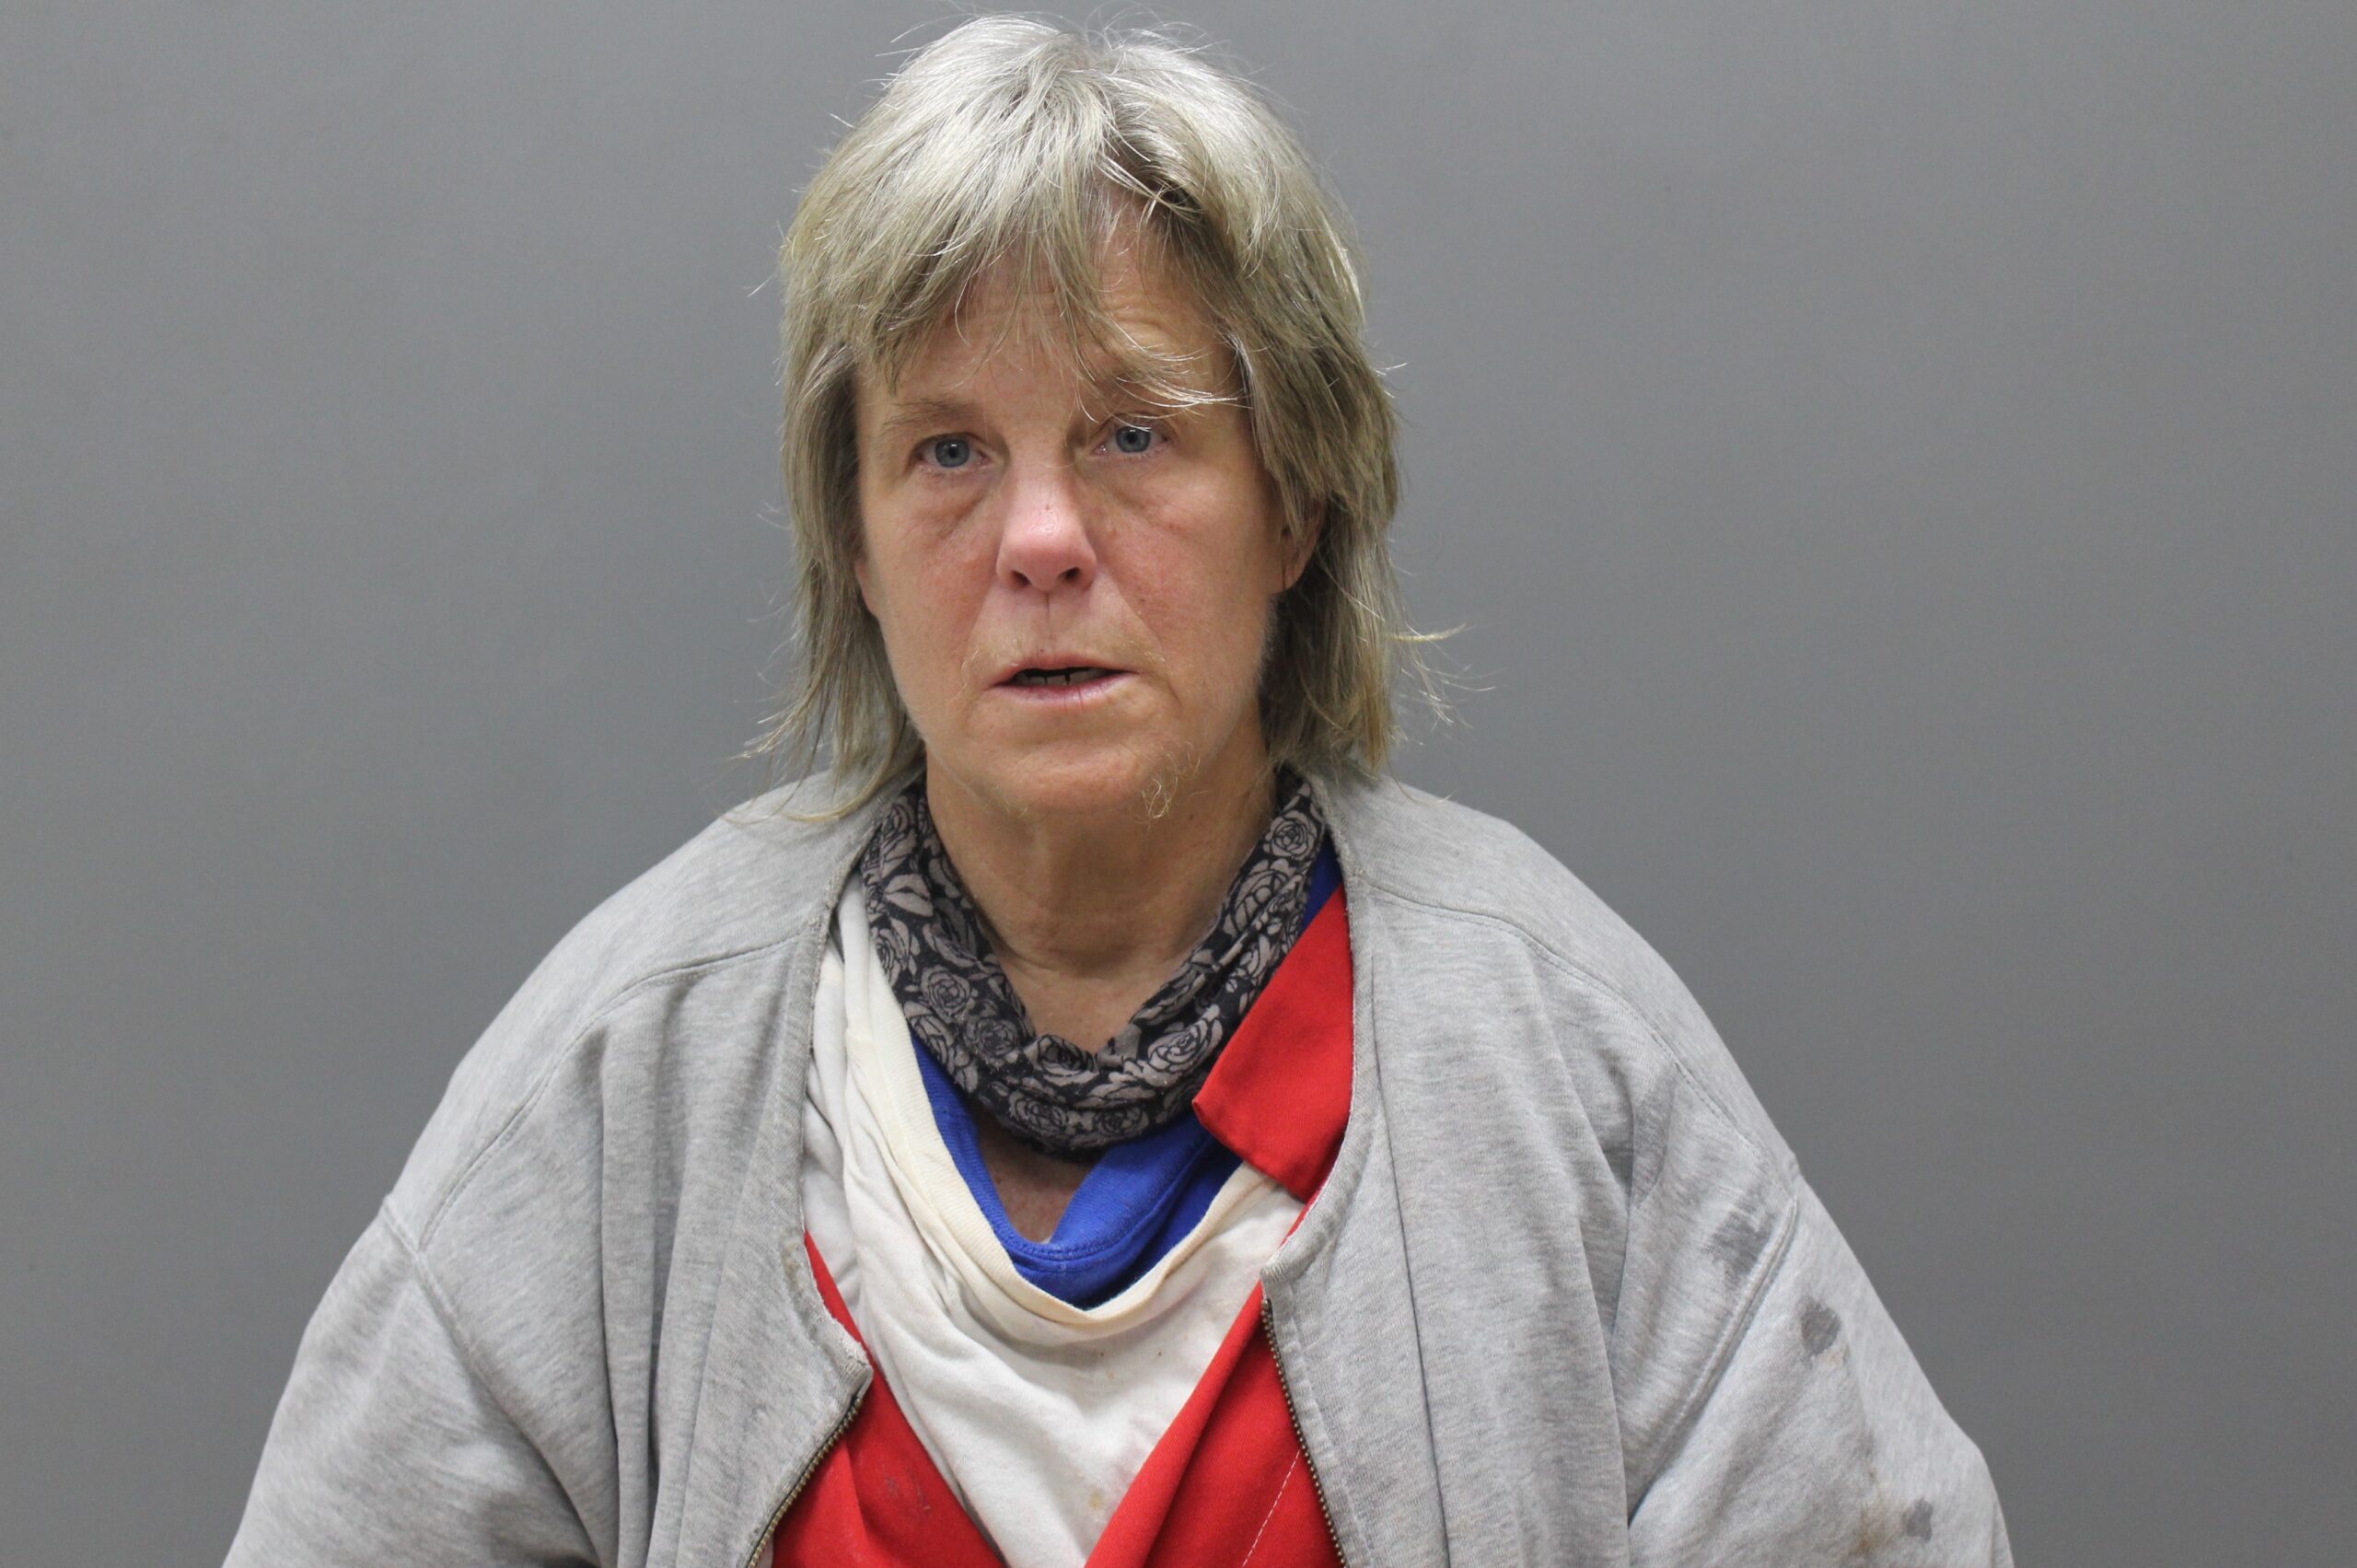 Name And Face Given To 'Jane Doe' Who Was Arrested For Littering In June: VIPD